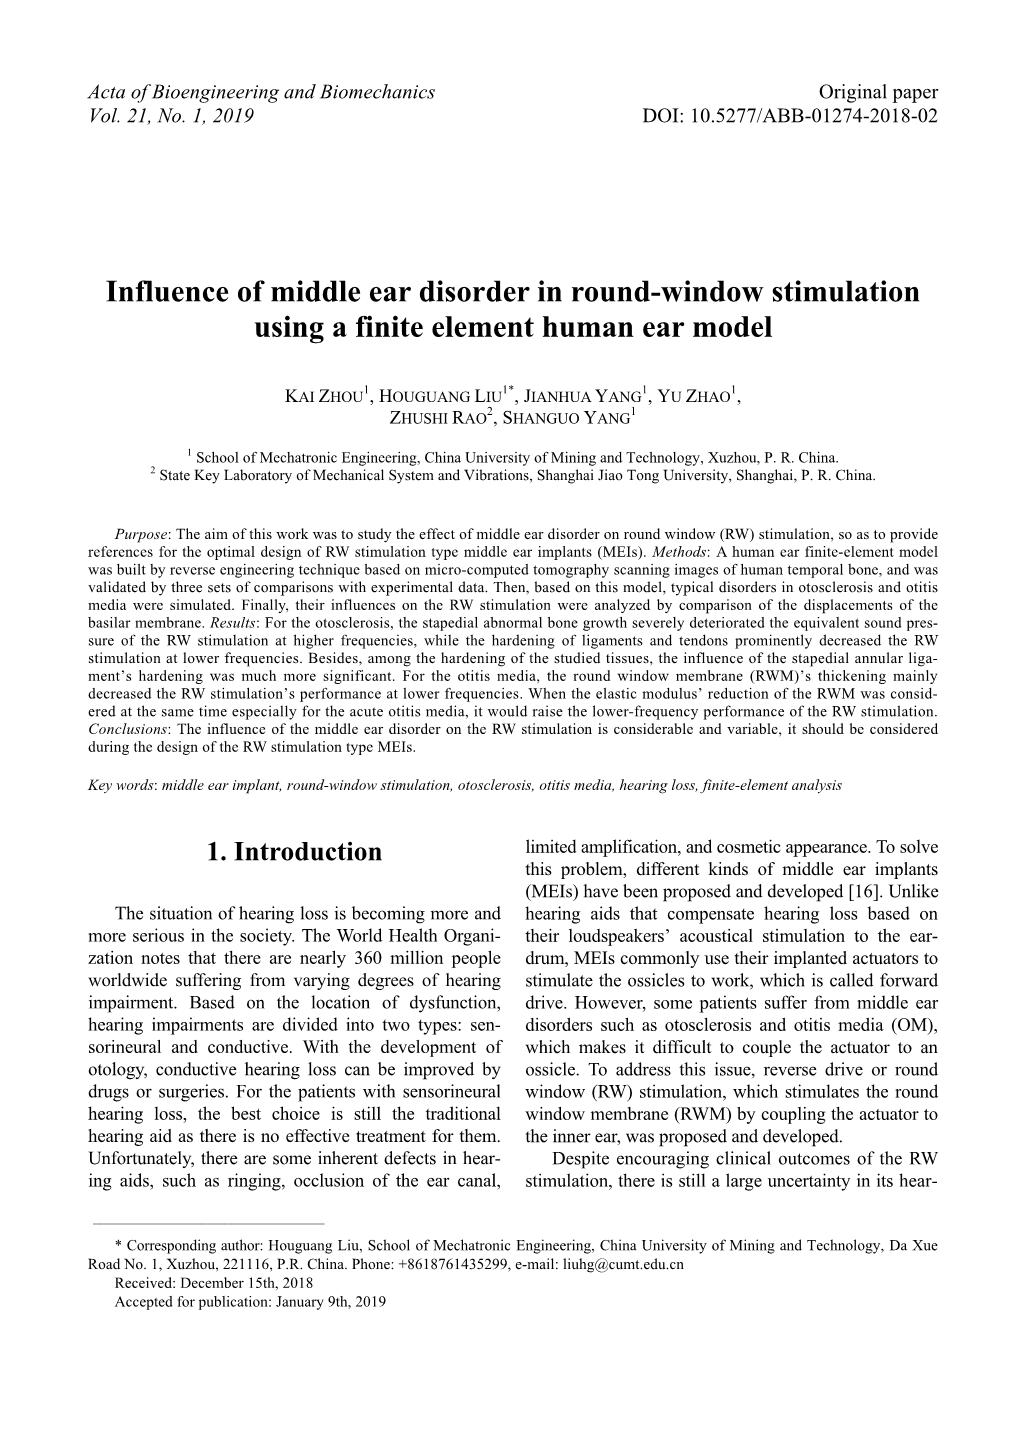 Influence of Middle Ear Disorder in Round-Window Stimulation Using a Finite Element Human Ear Model